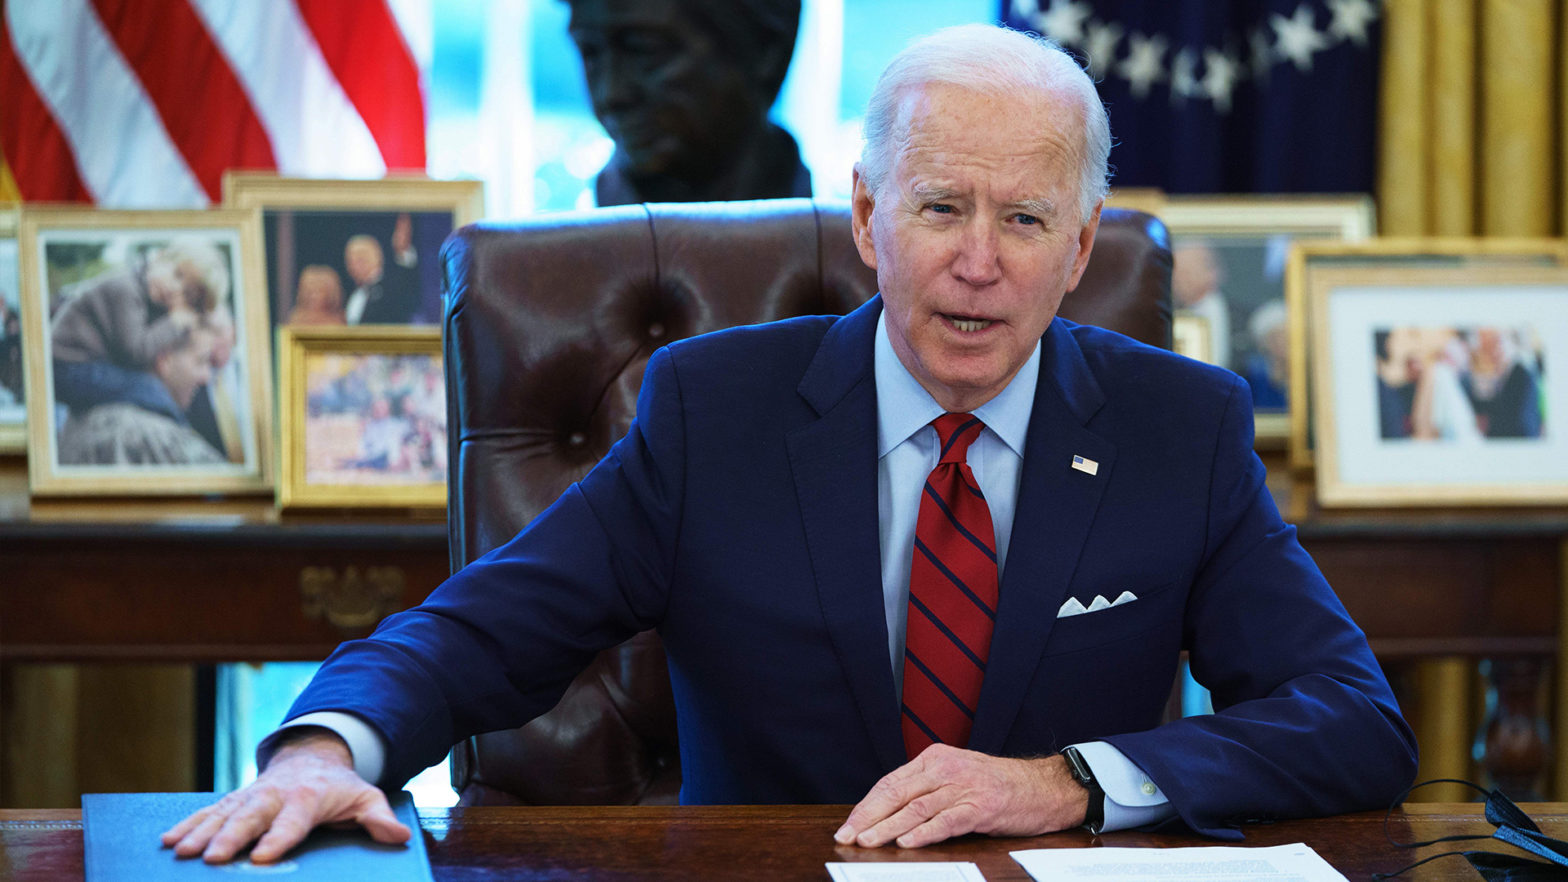 Joe Biden Has Announced A Student Loan Forgiveness Plan, But Research Shows It Could Slightly Favor Higher-Income Americans